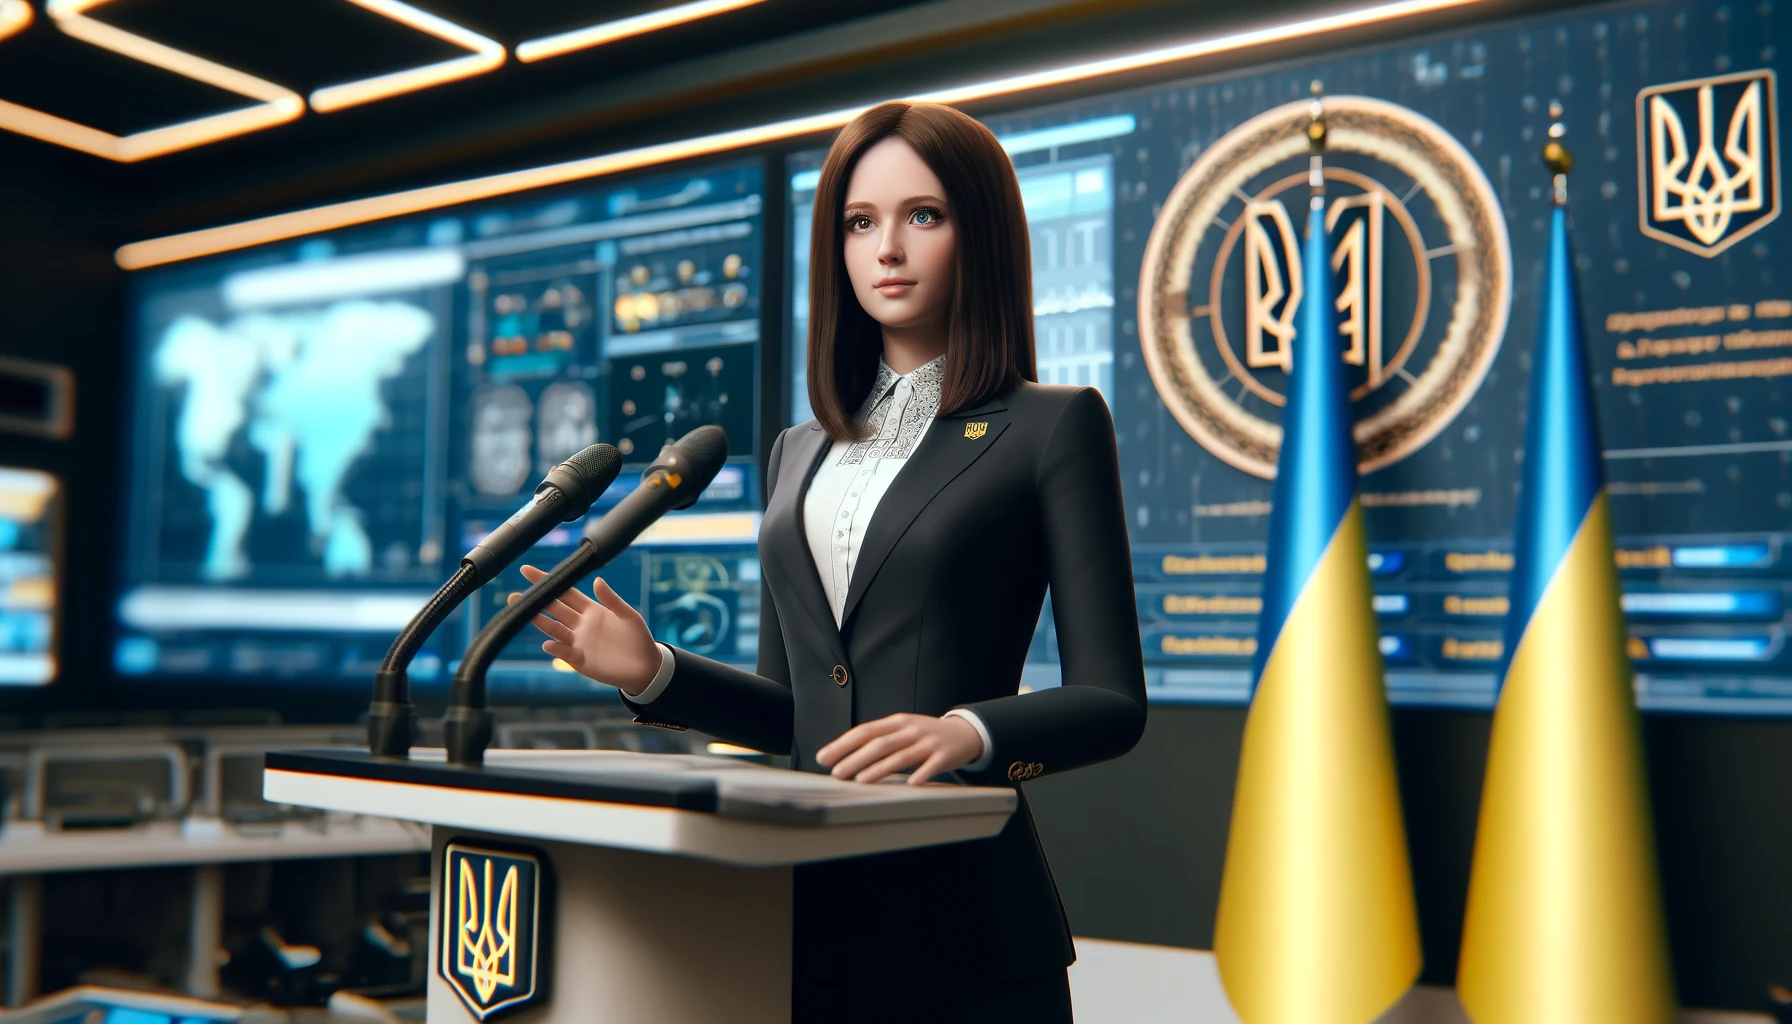 Ukraine introduces AI-generated spokesperson for its foreign ministry